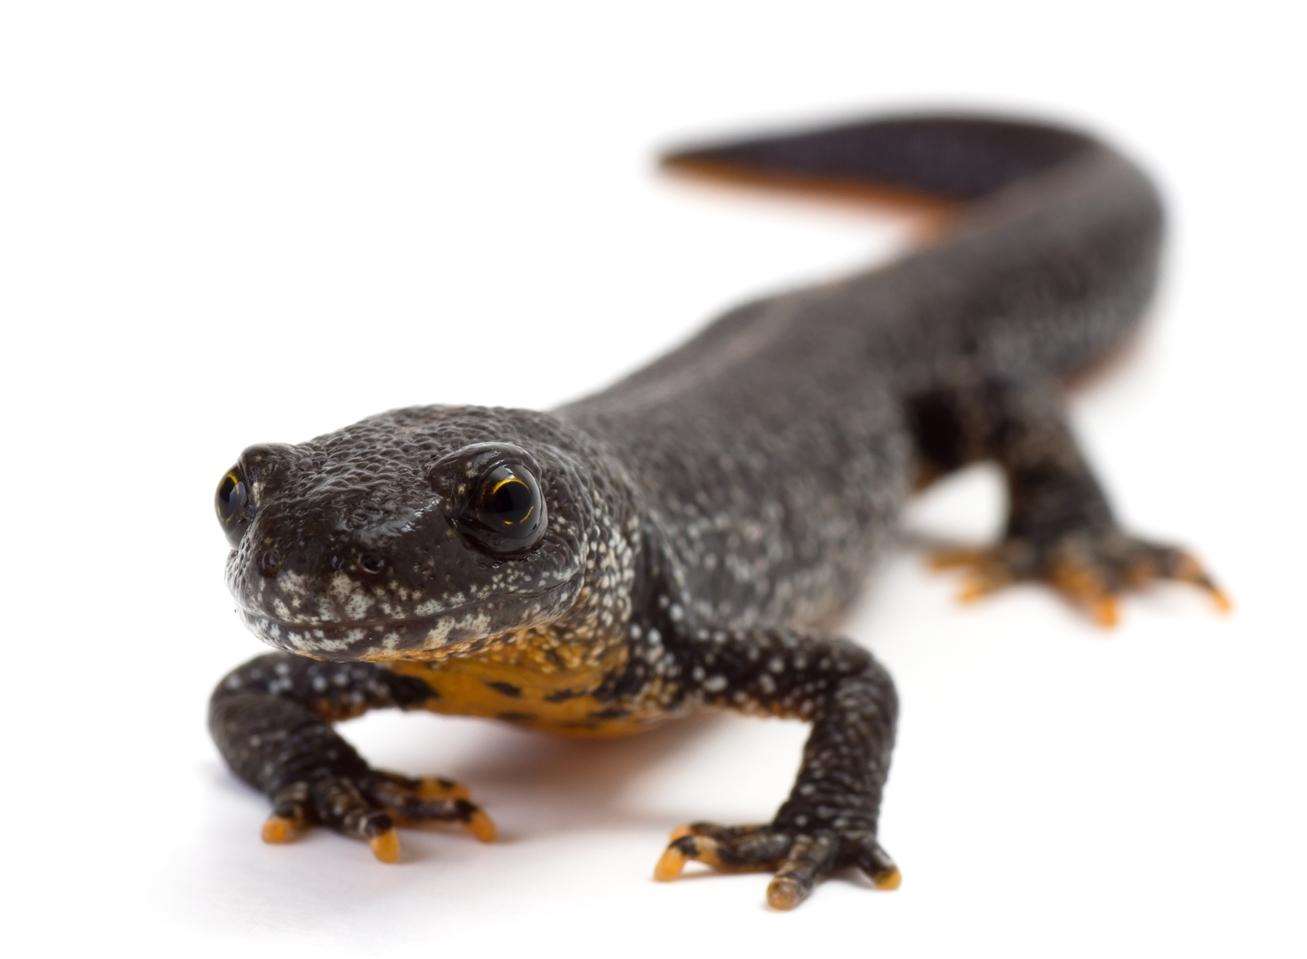 Endangered great crested newts were found on the site